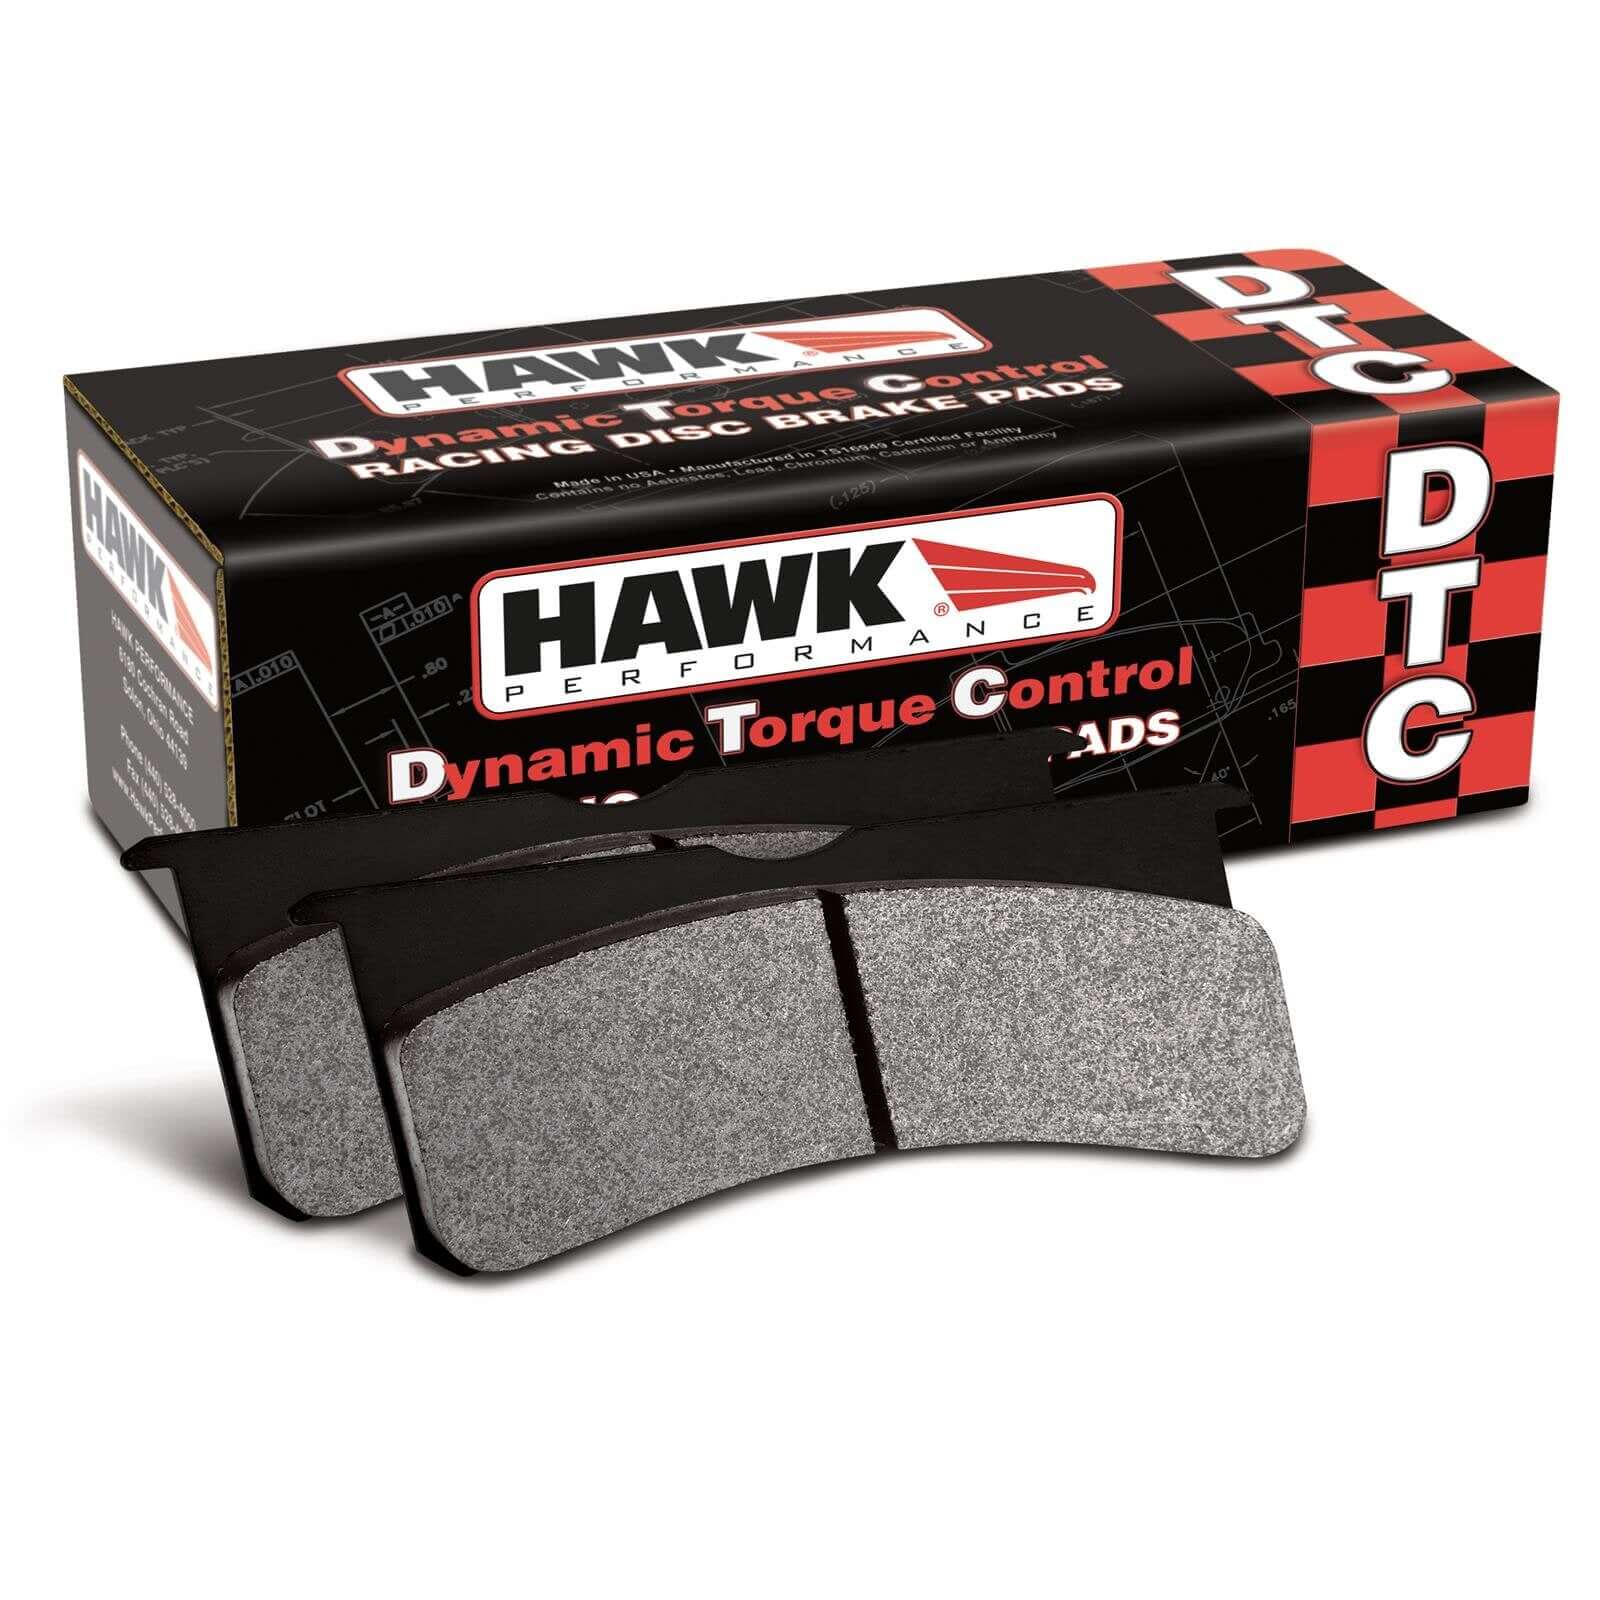 E46 M3: DTC 70 Brake Pads (Fronts) - $341.89